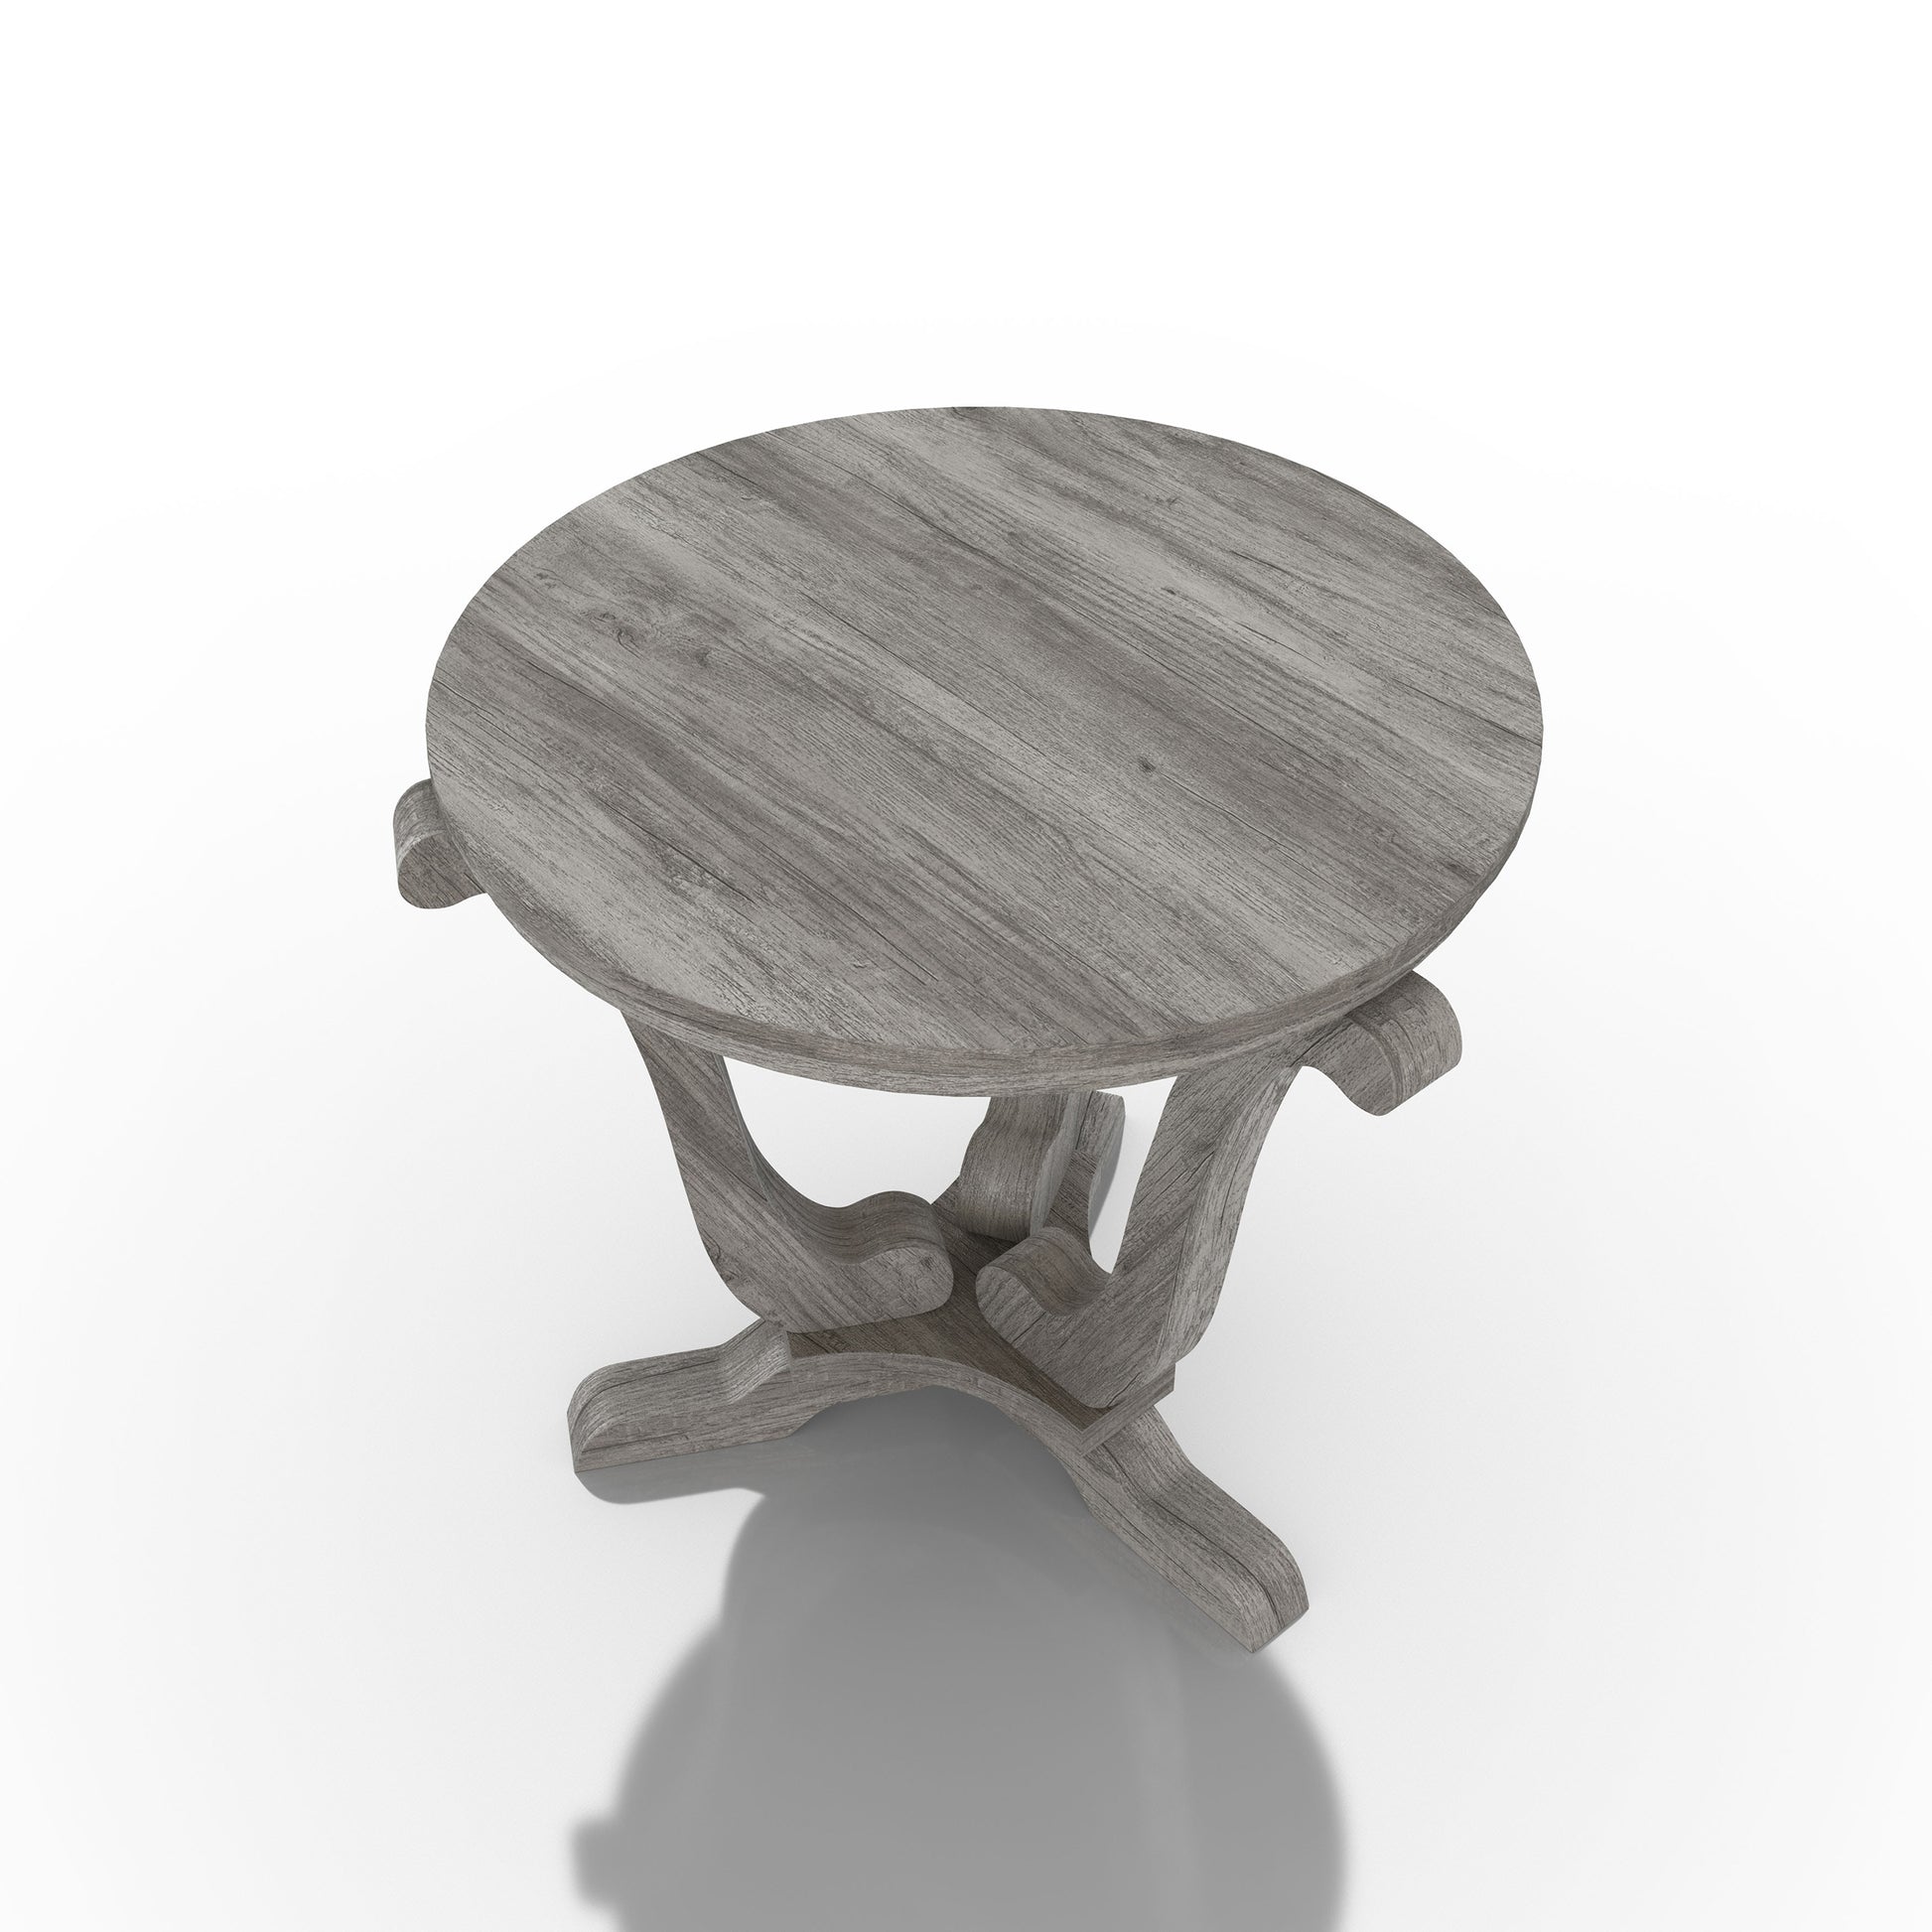 Right angled bird's eye view of a farmhouse vintage gray oak curved pedestal end table on a white background